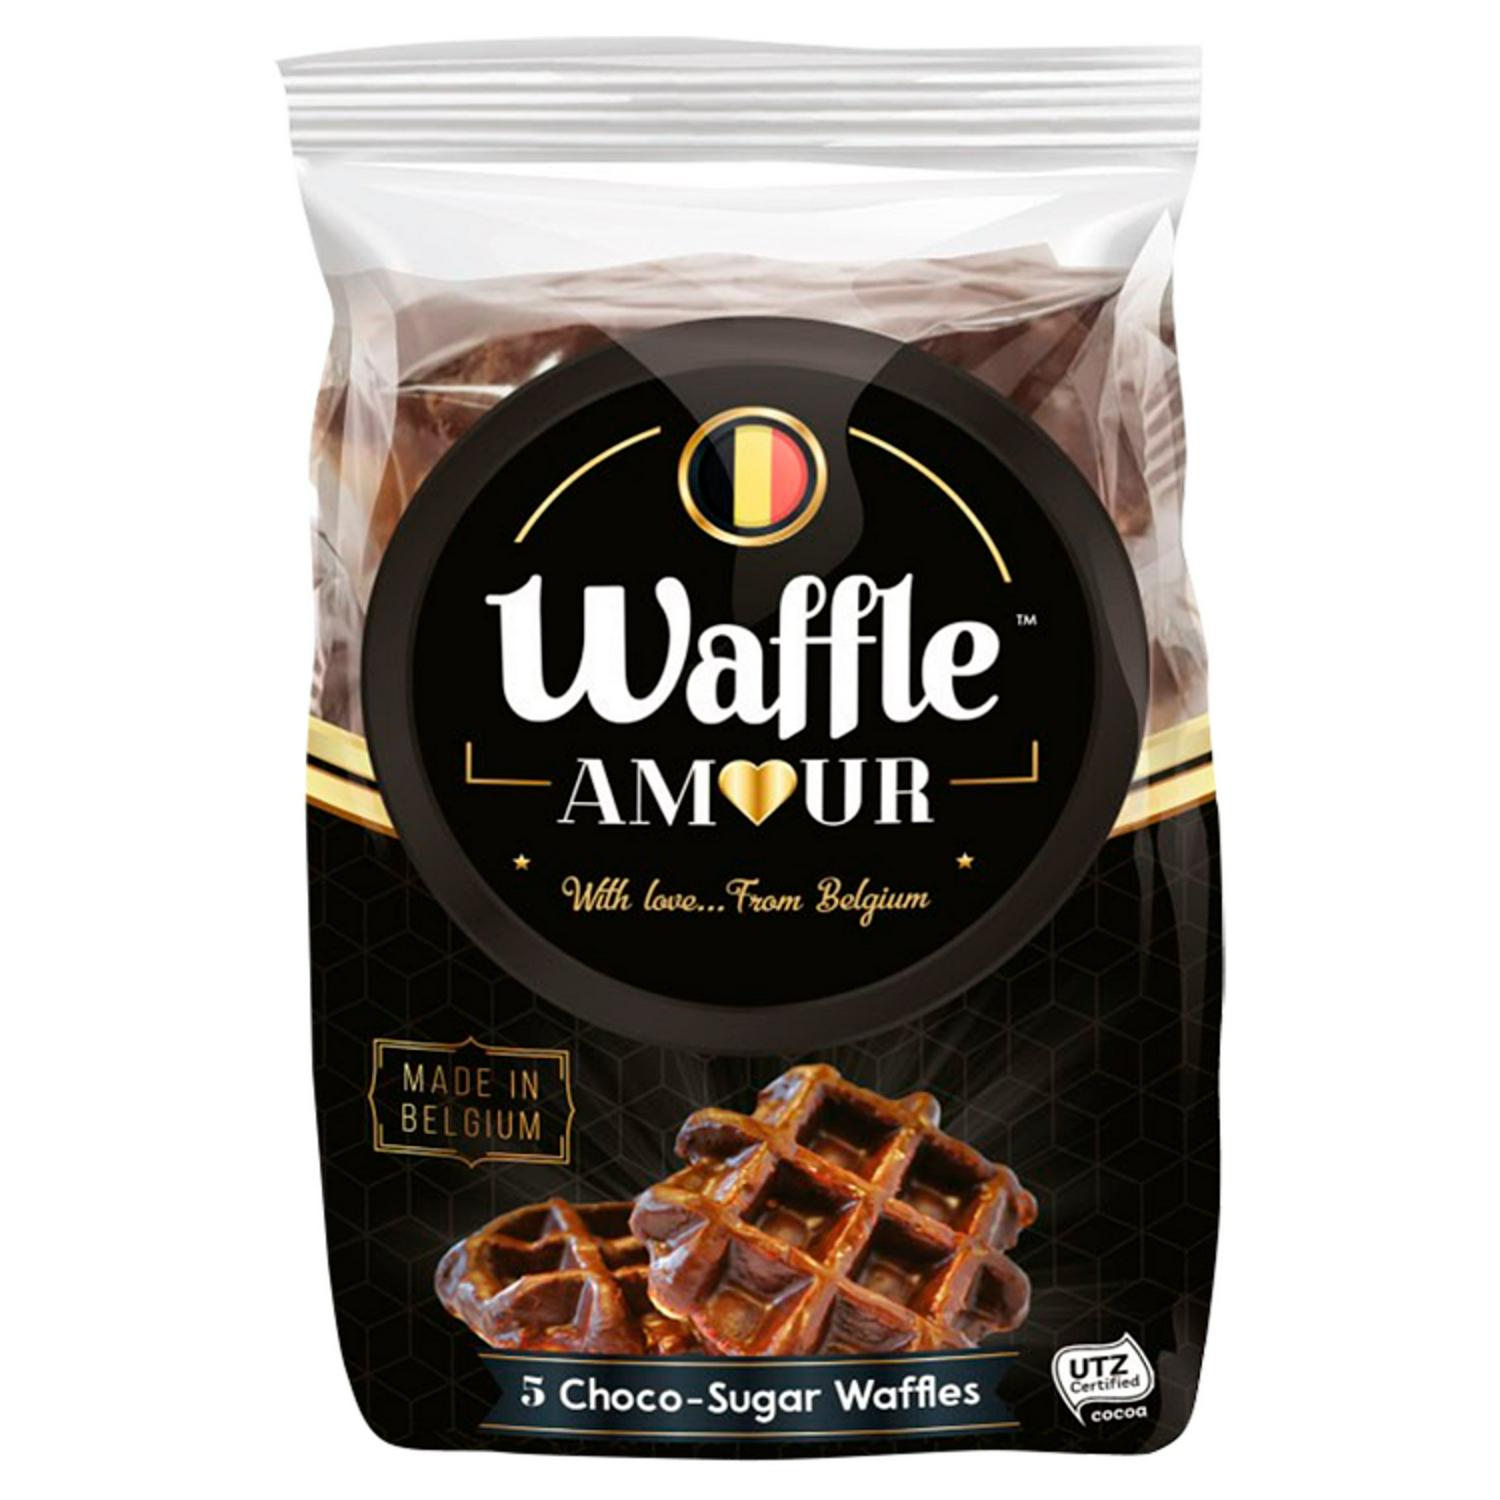 Waffle Amour Choco-Sugar Waffles 5x 60g (Jan - Oct 23) RRP £1.69 CLEARANCE XL 89p or 2 for £1.50